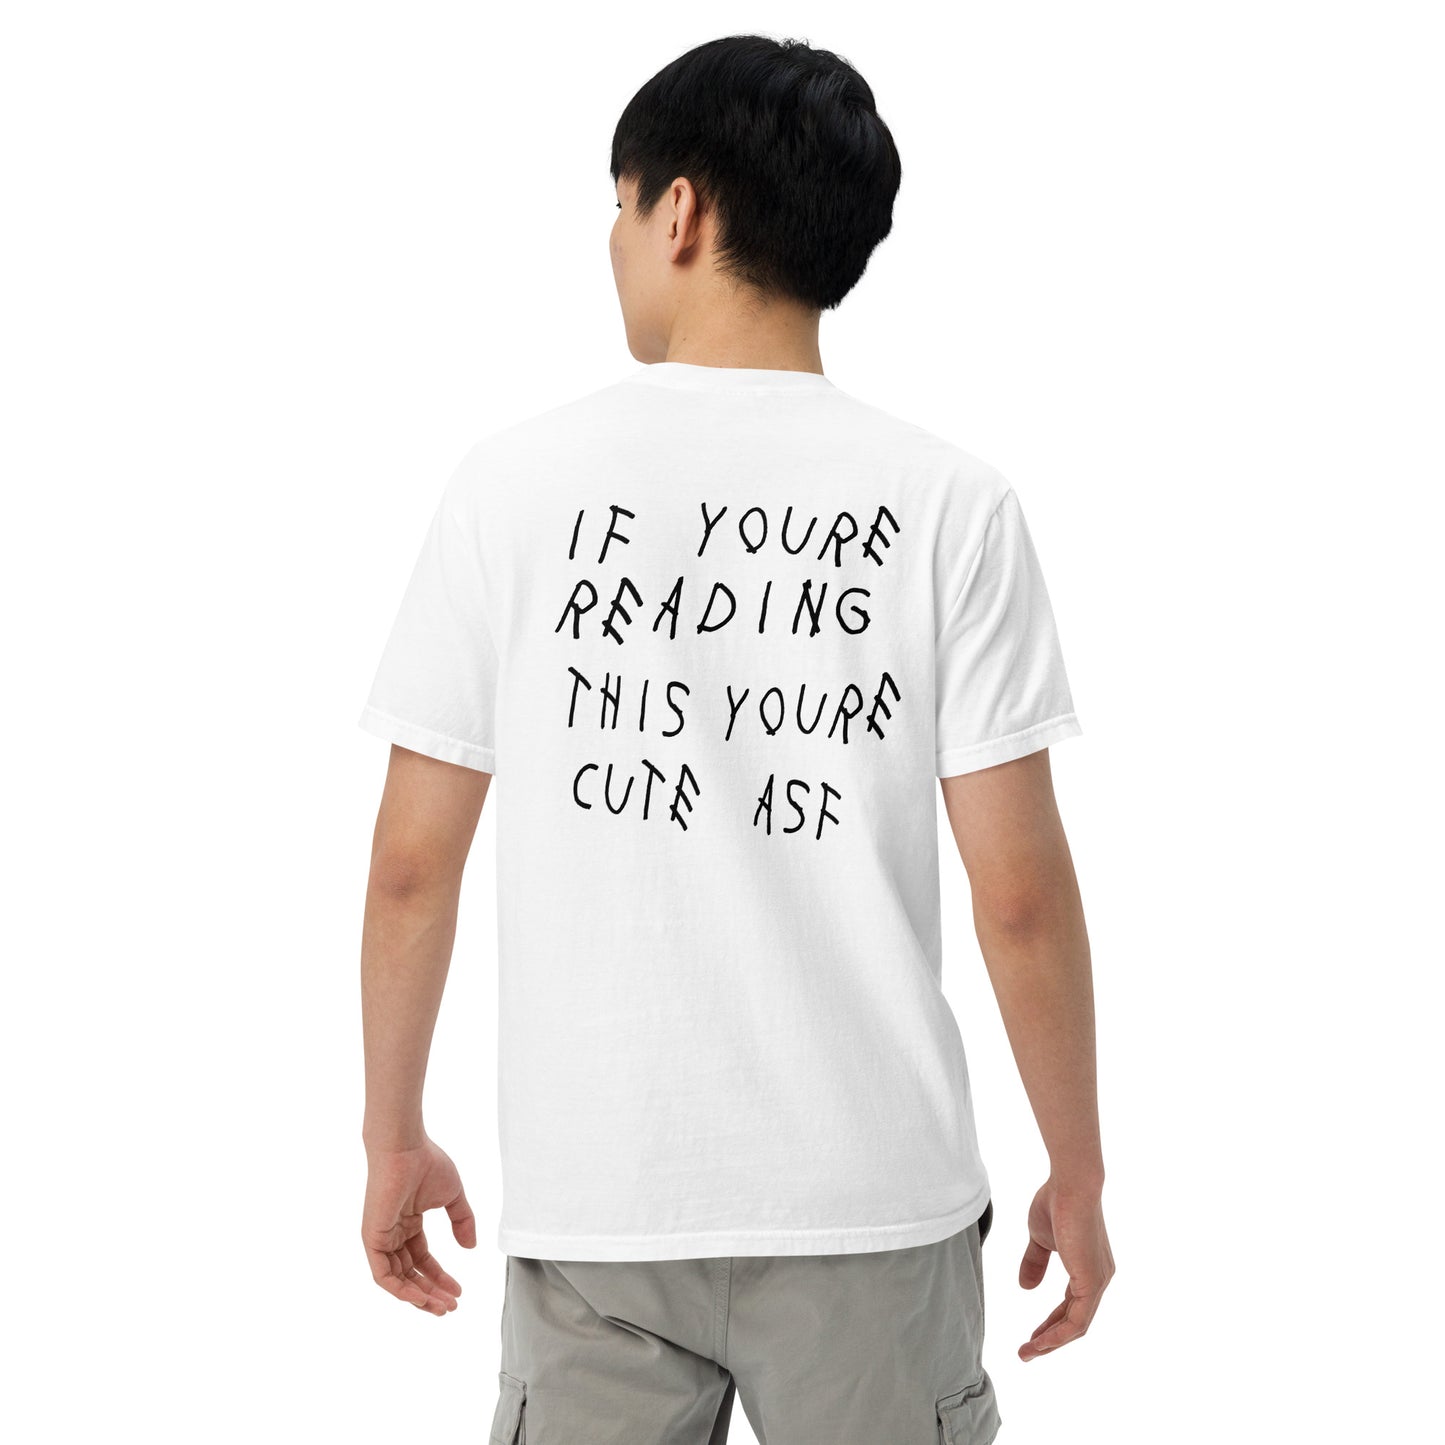 If you're reading this t-shirt